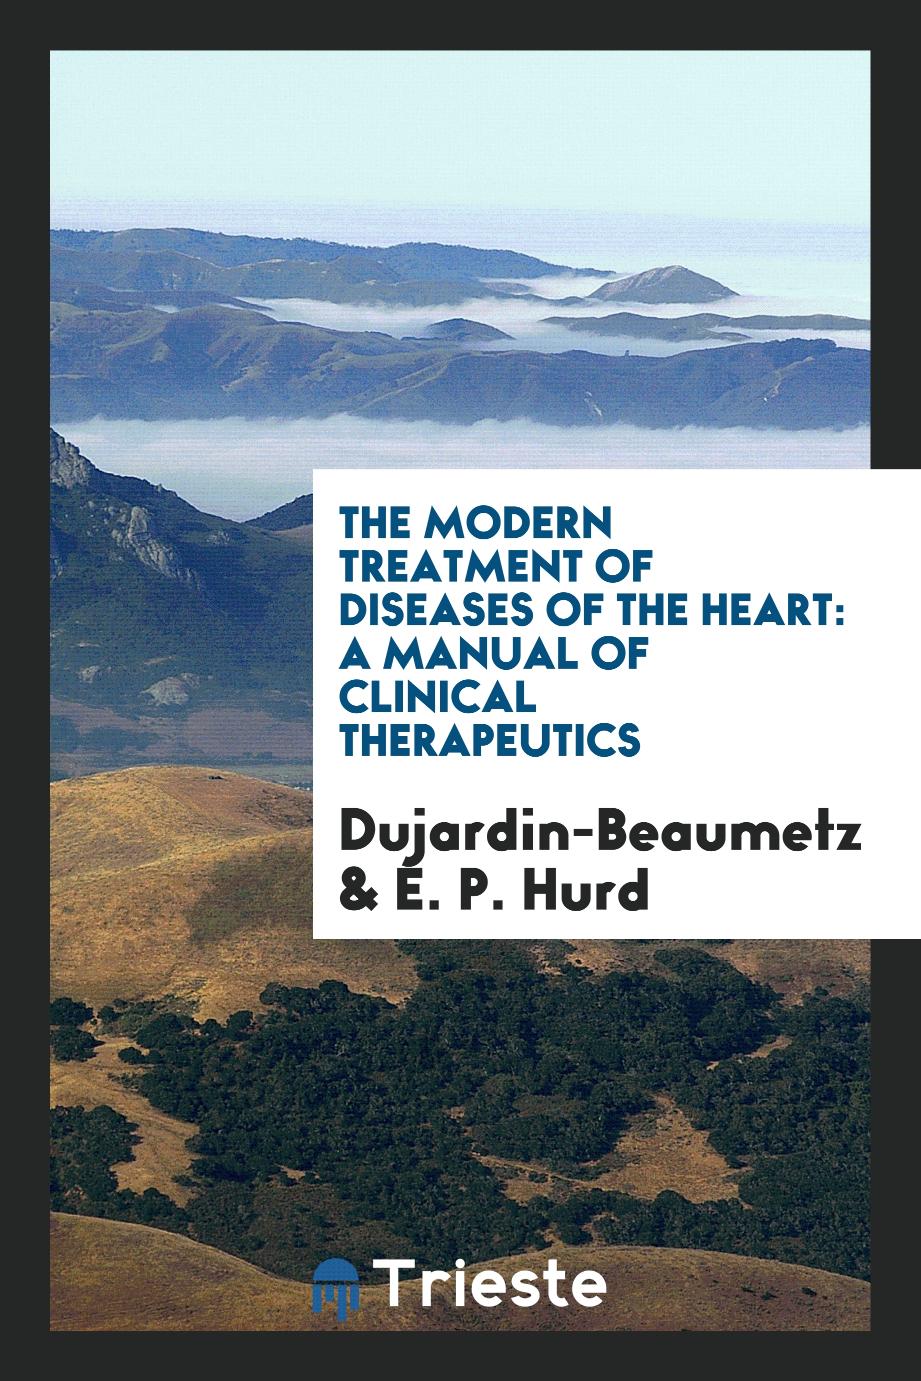 The Modern Treatment of Diseases of the Heart: A Manual of Clinical Therapeutics